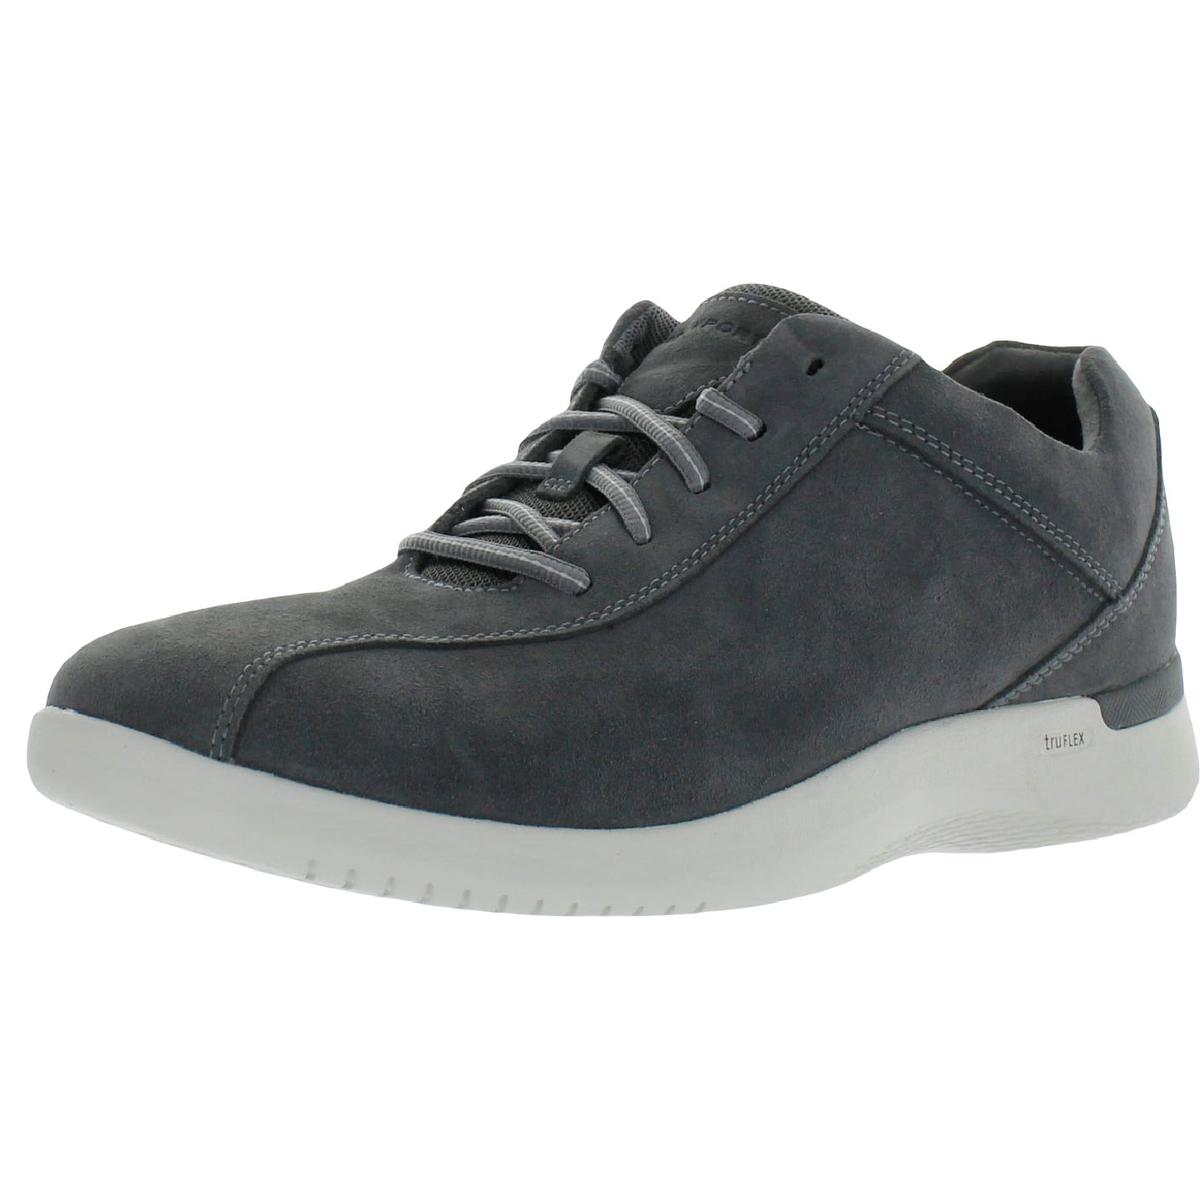 Rockport TruFLEX Motion Fly Taconic Mens Suede Biker Toe Casual and Fashion Sneakers